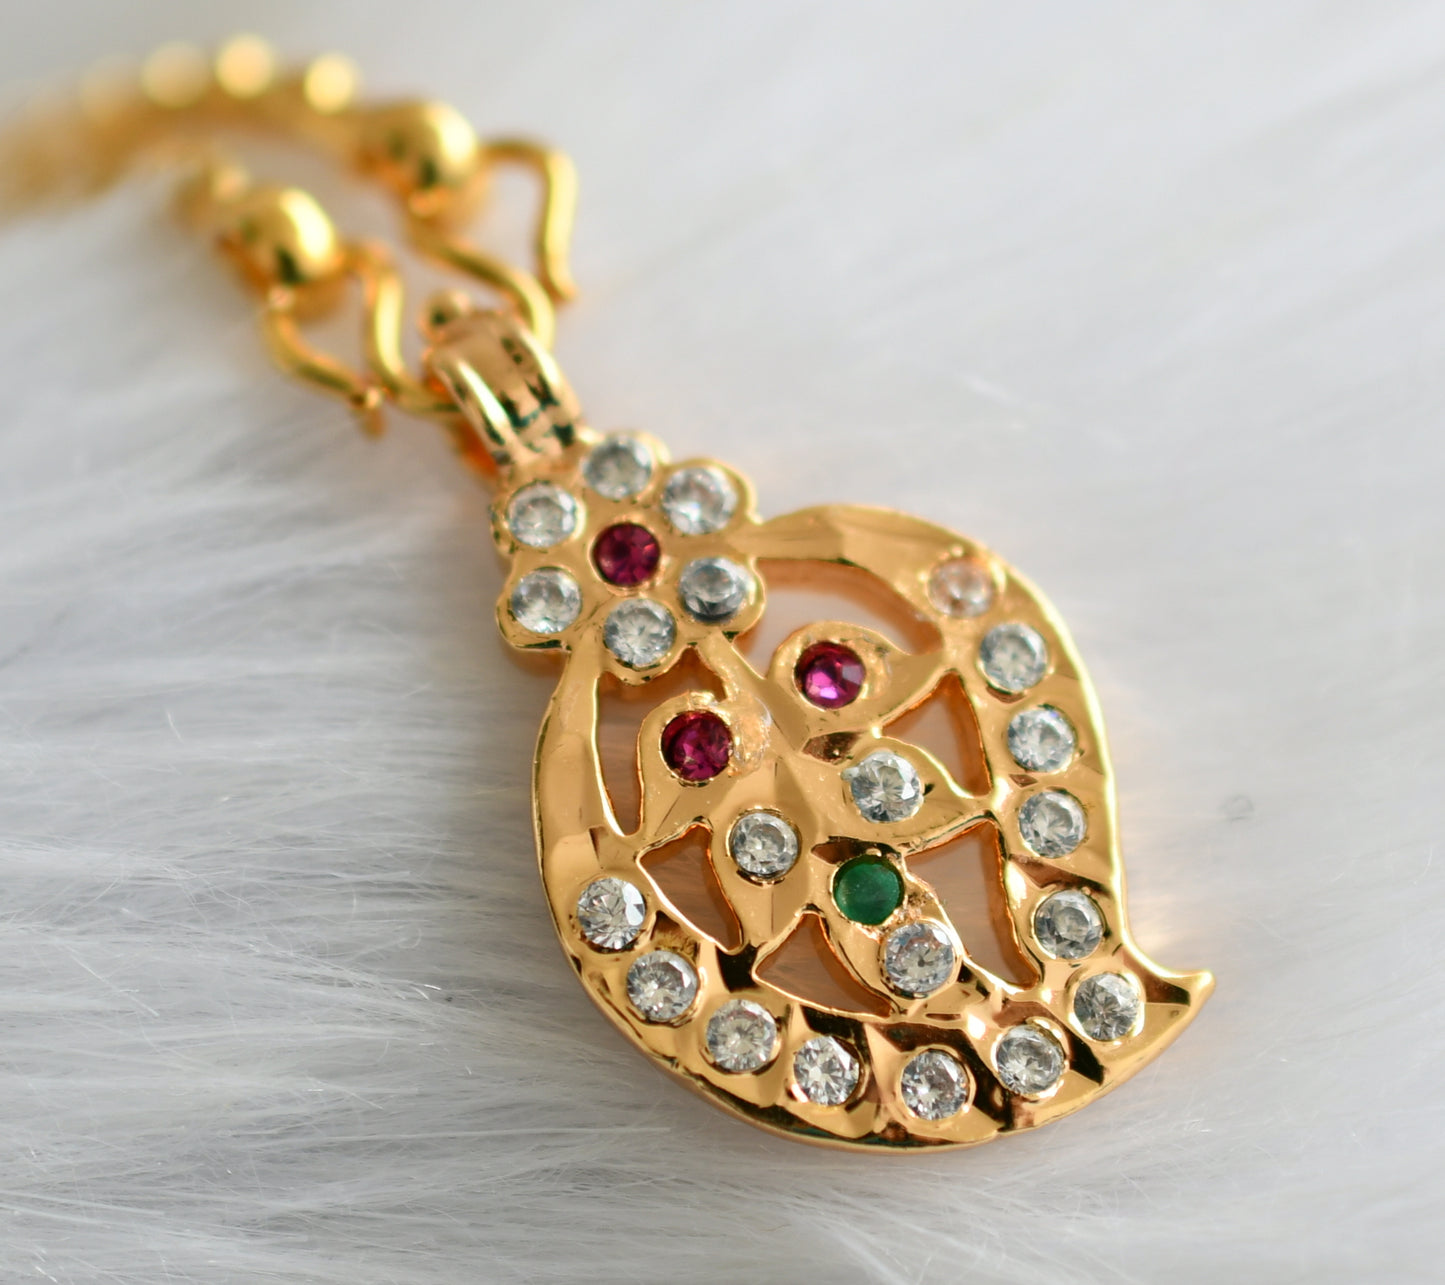 Gold tone 24 inches chain with pink-green-white mango pendant dj-43836